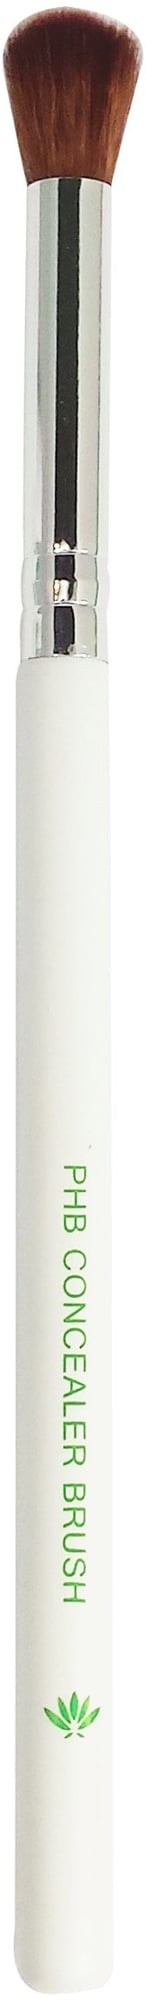 PHB Ethical Beauty Concealer Brush